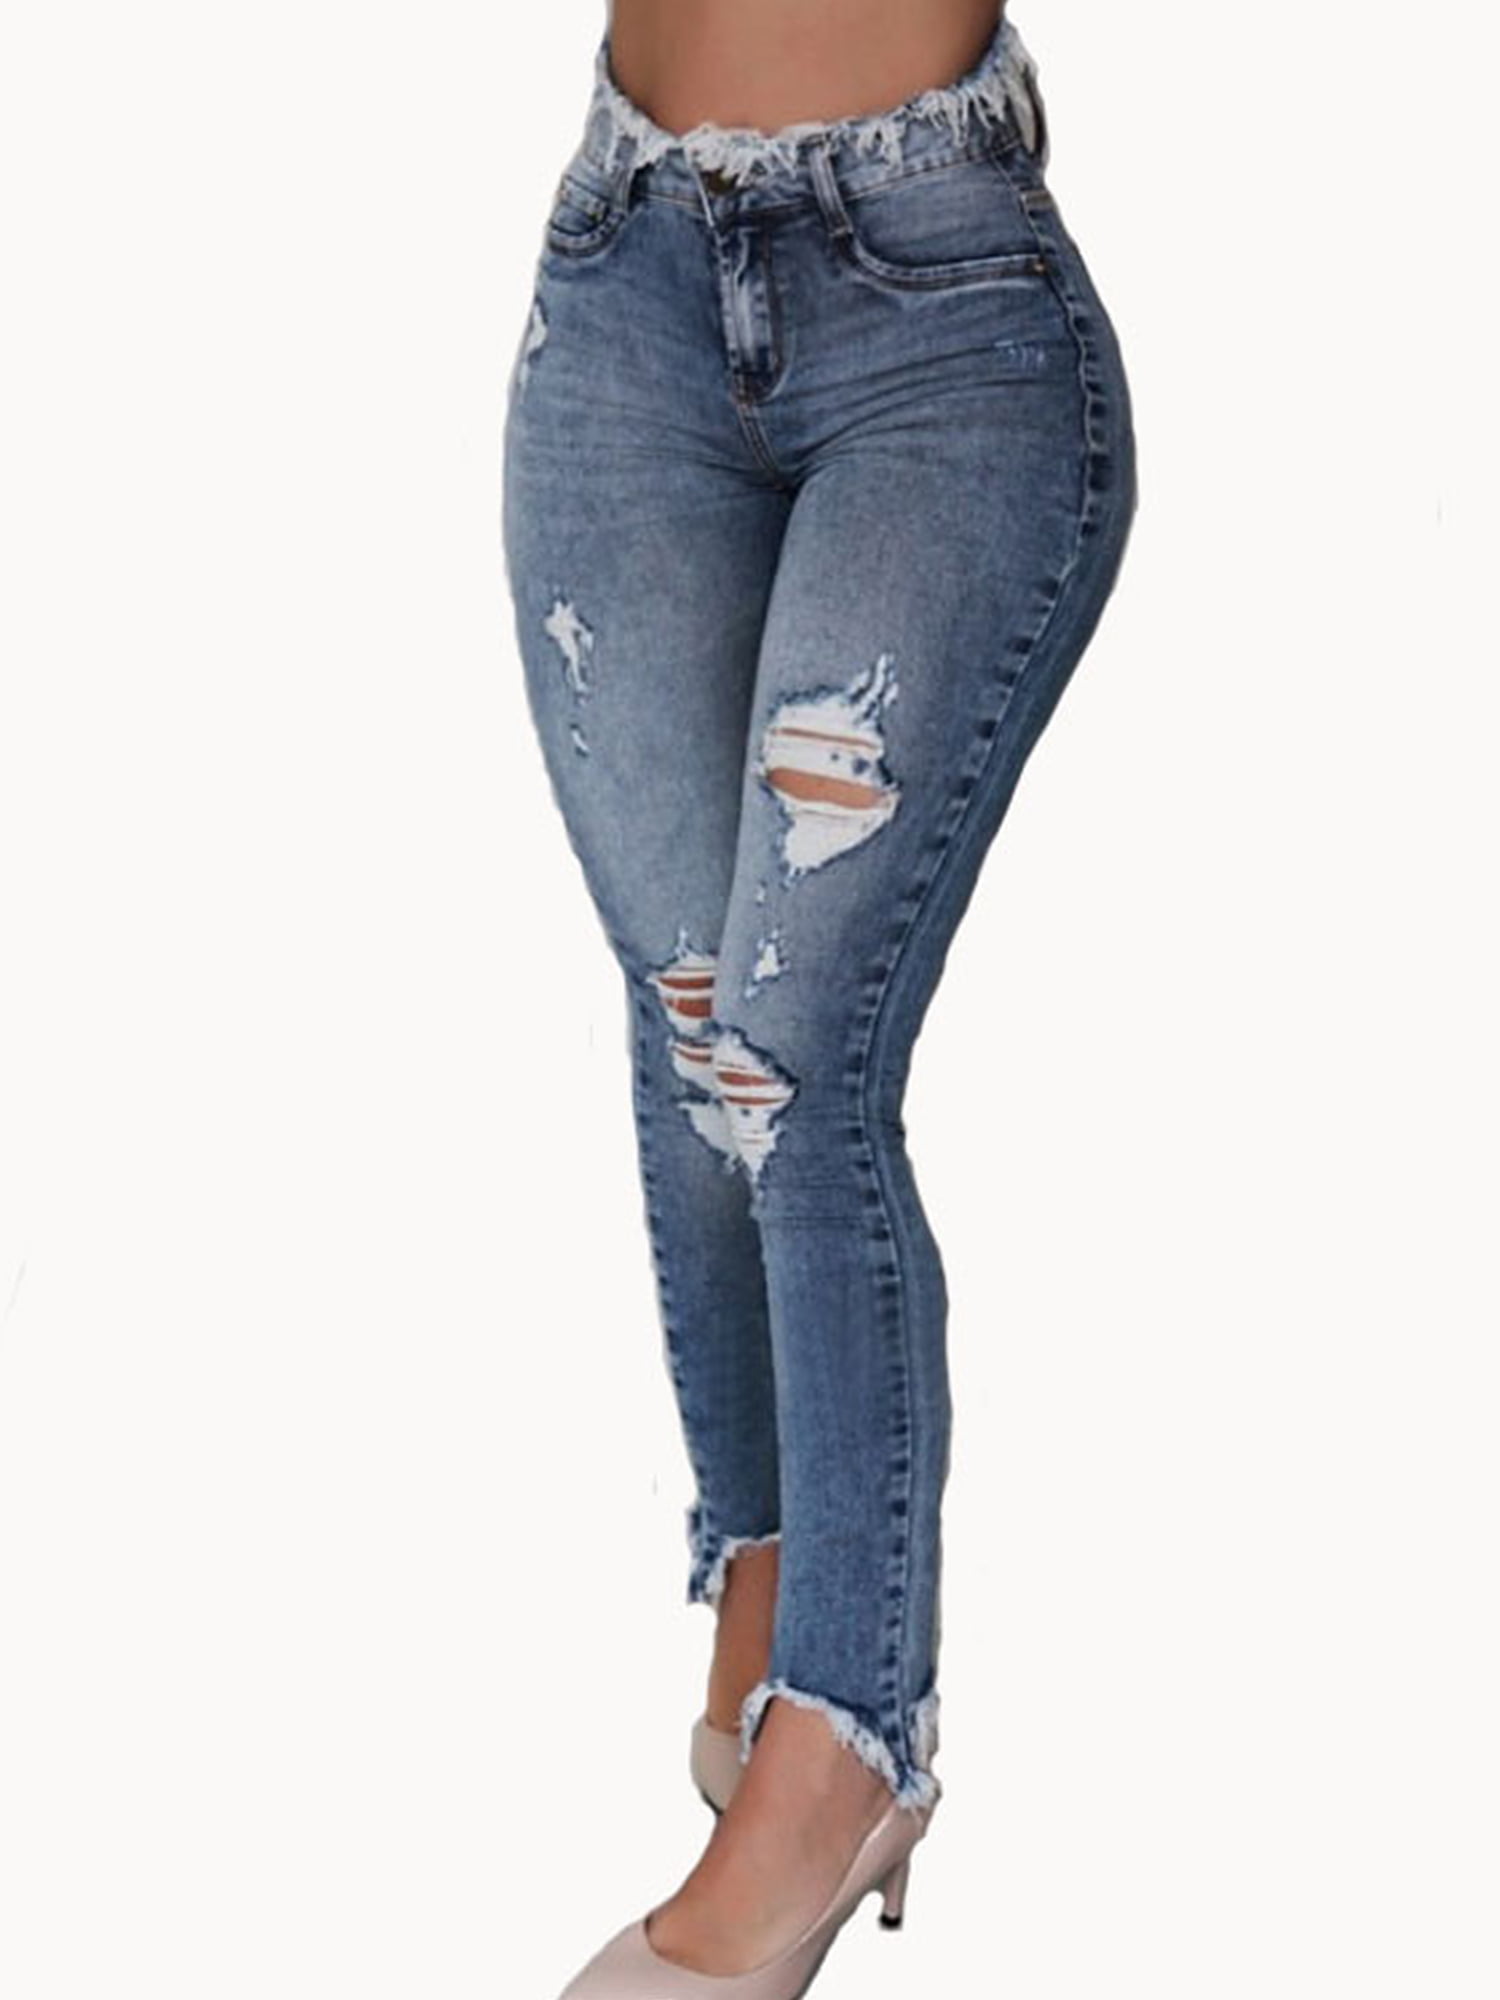 Women Pants Floral Embroidered Denim Ripped Pants Stretch Jeans Pencil Trousers 